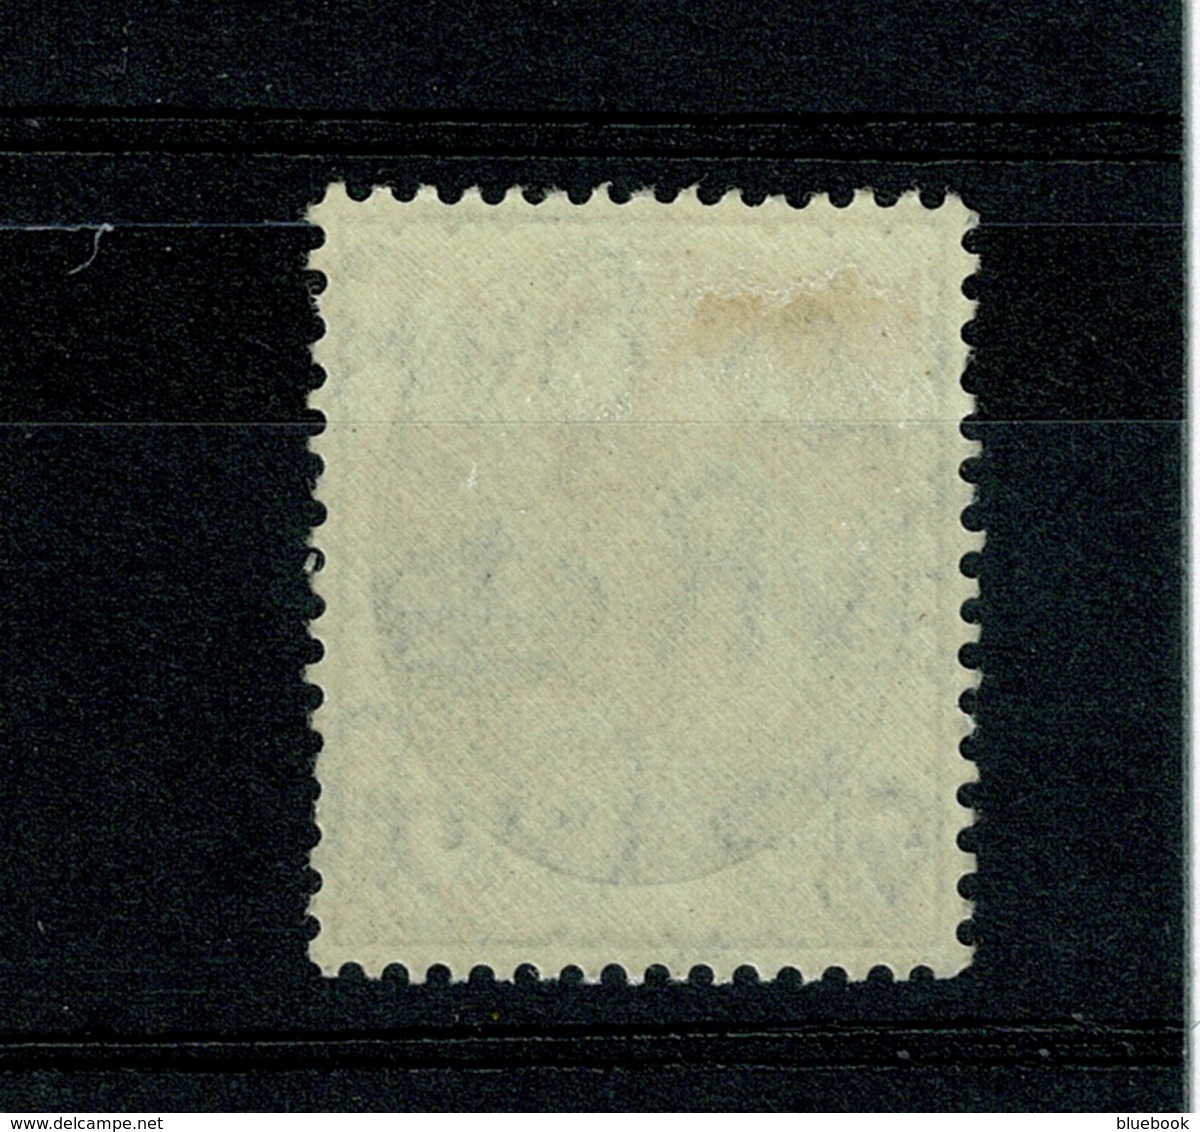 Ref 1337 - GB Stamps - KGV 2 1/2d PUC SG 437 - Lightly Mounted Mint Stamp - Unused Stamps